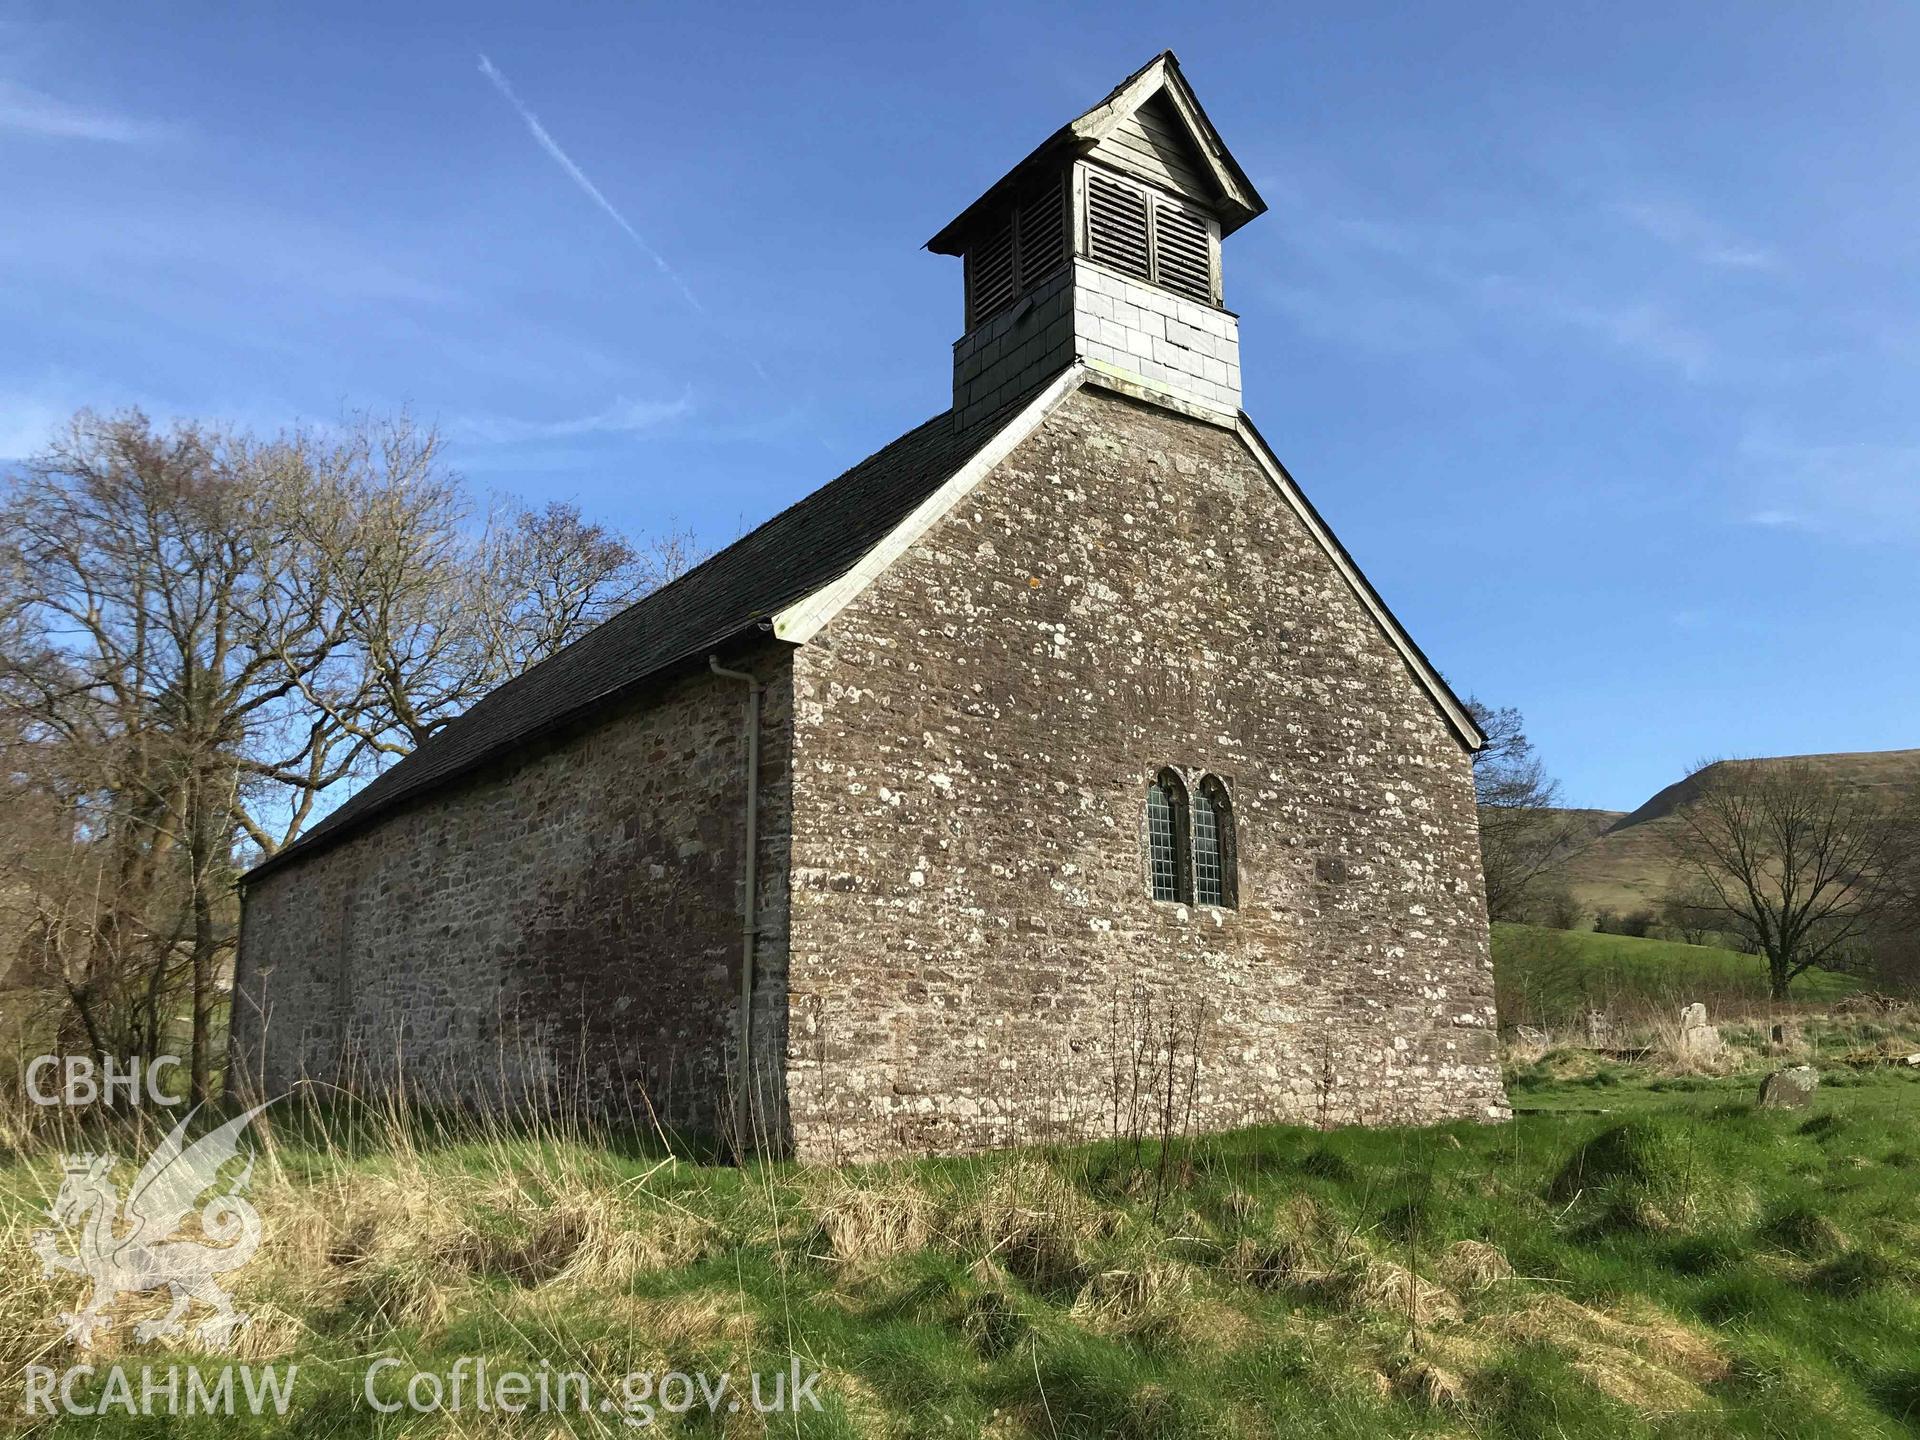 Digital photograph showing side elevation of St Ellyw's Church, Llanelieu, produced by Paul Davis in 2020